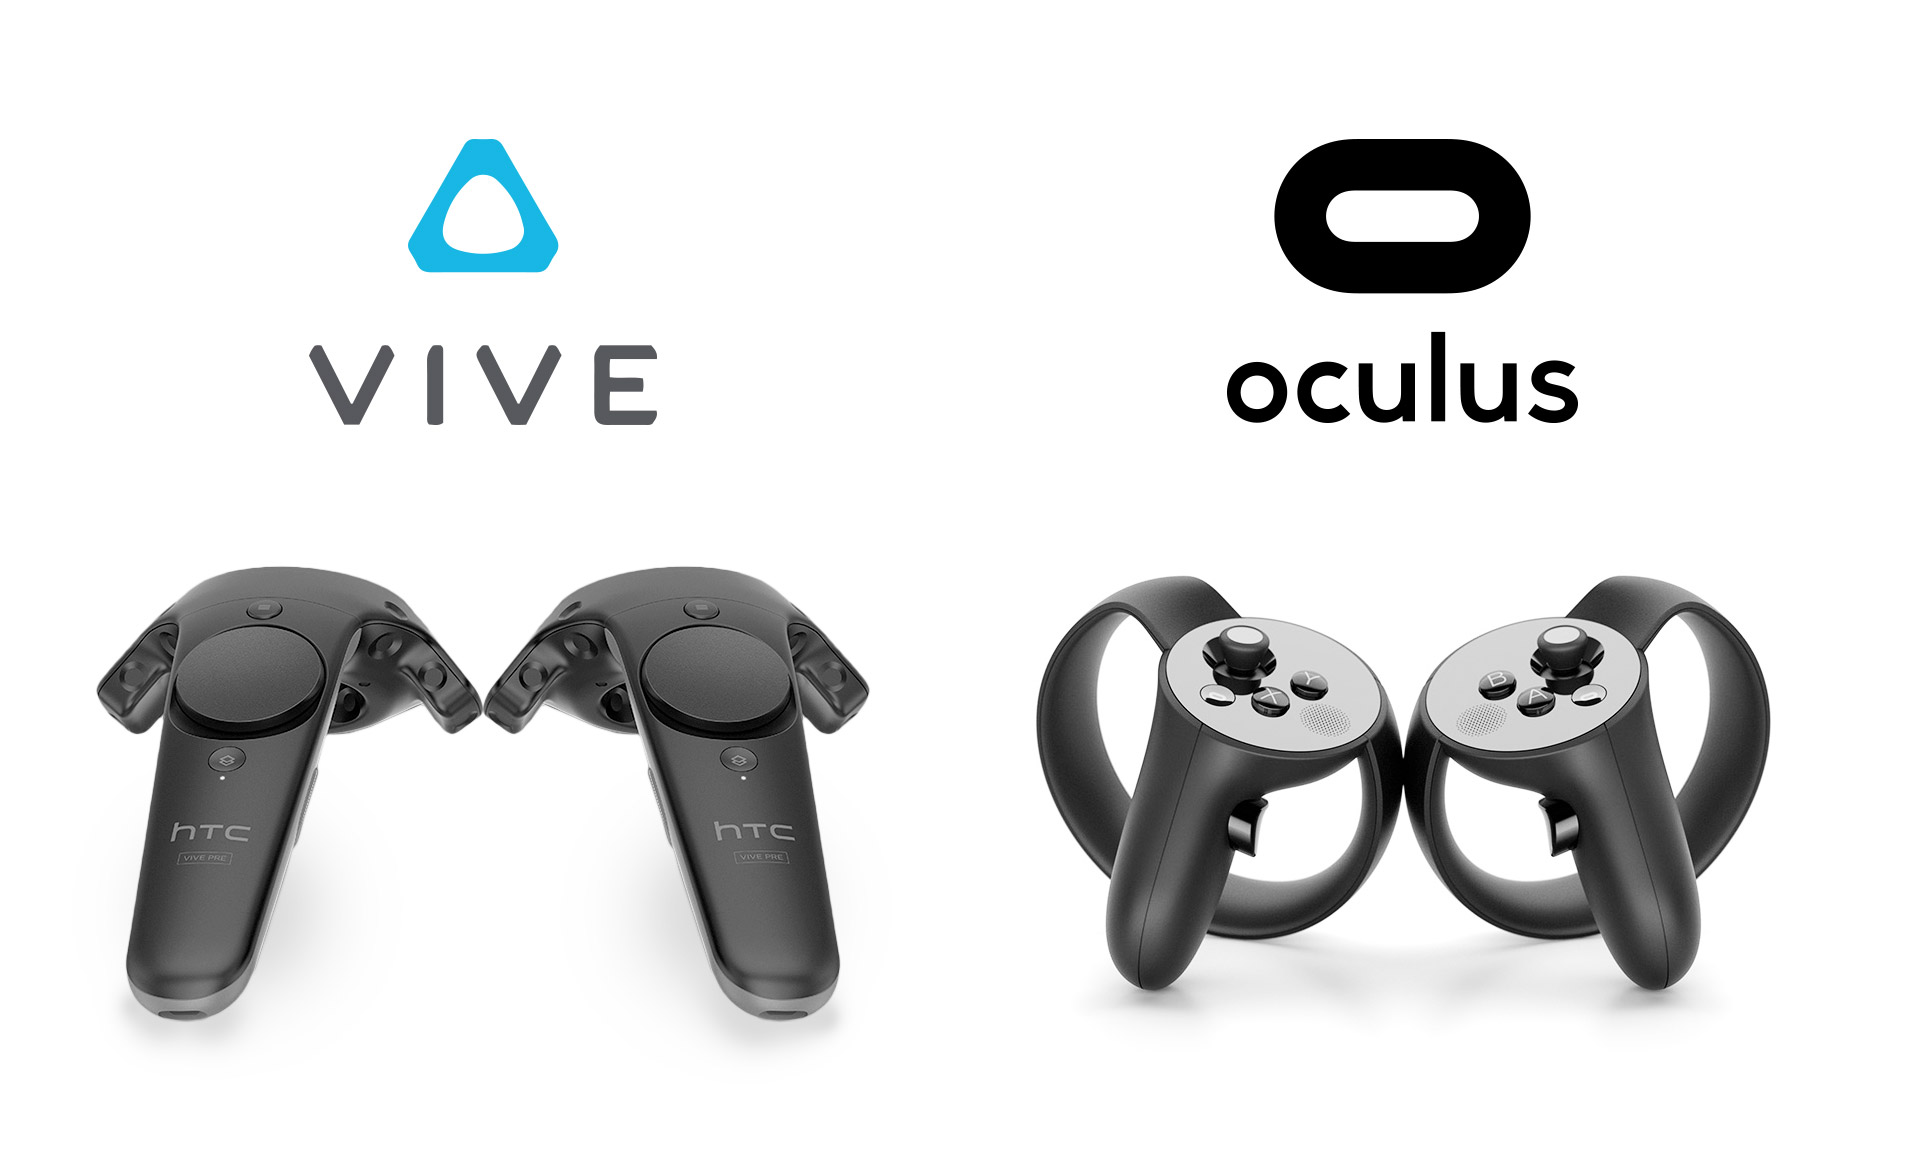 oculus vr headset and controllers